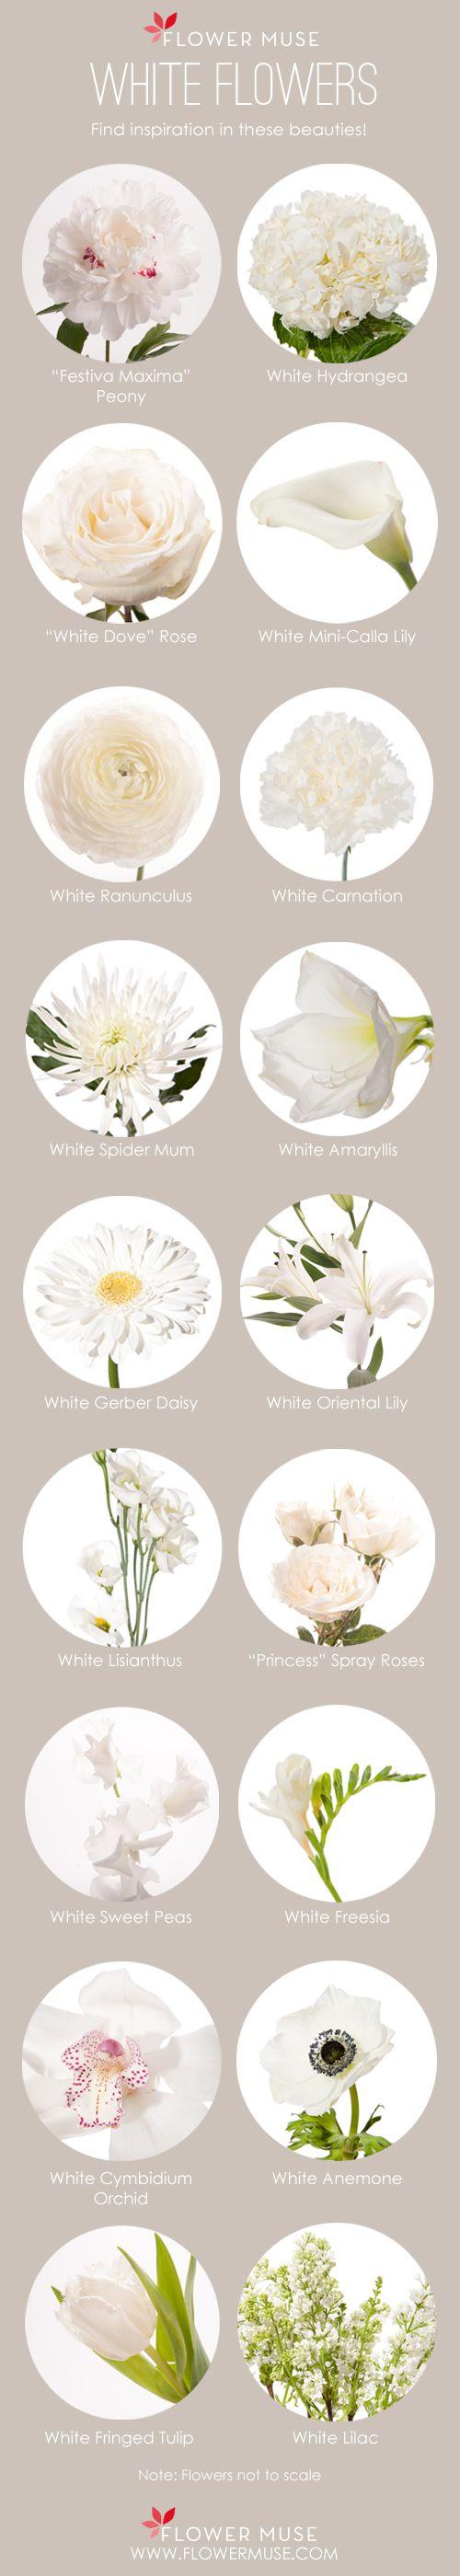 Mariage - Our Favorite: White Flowers - Flower Muse Blog